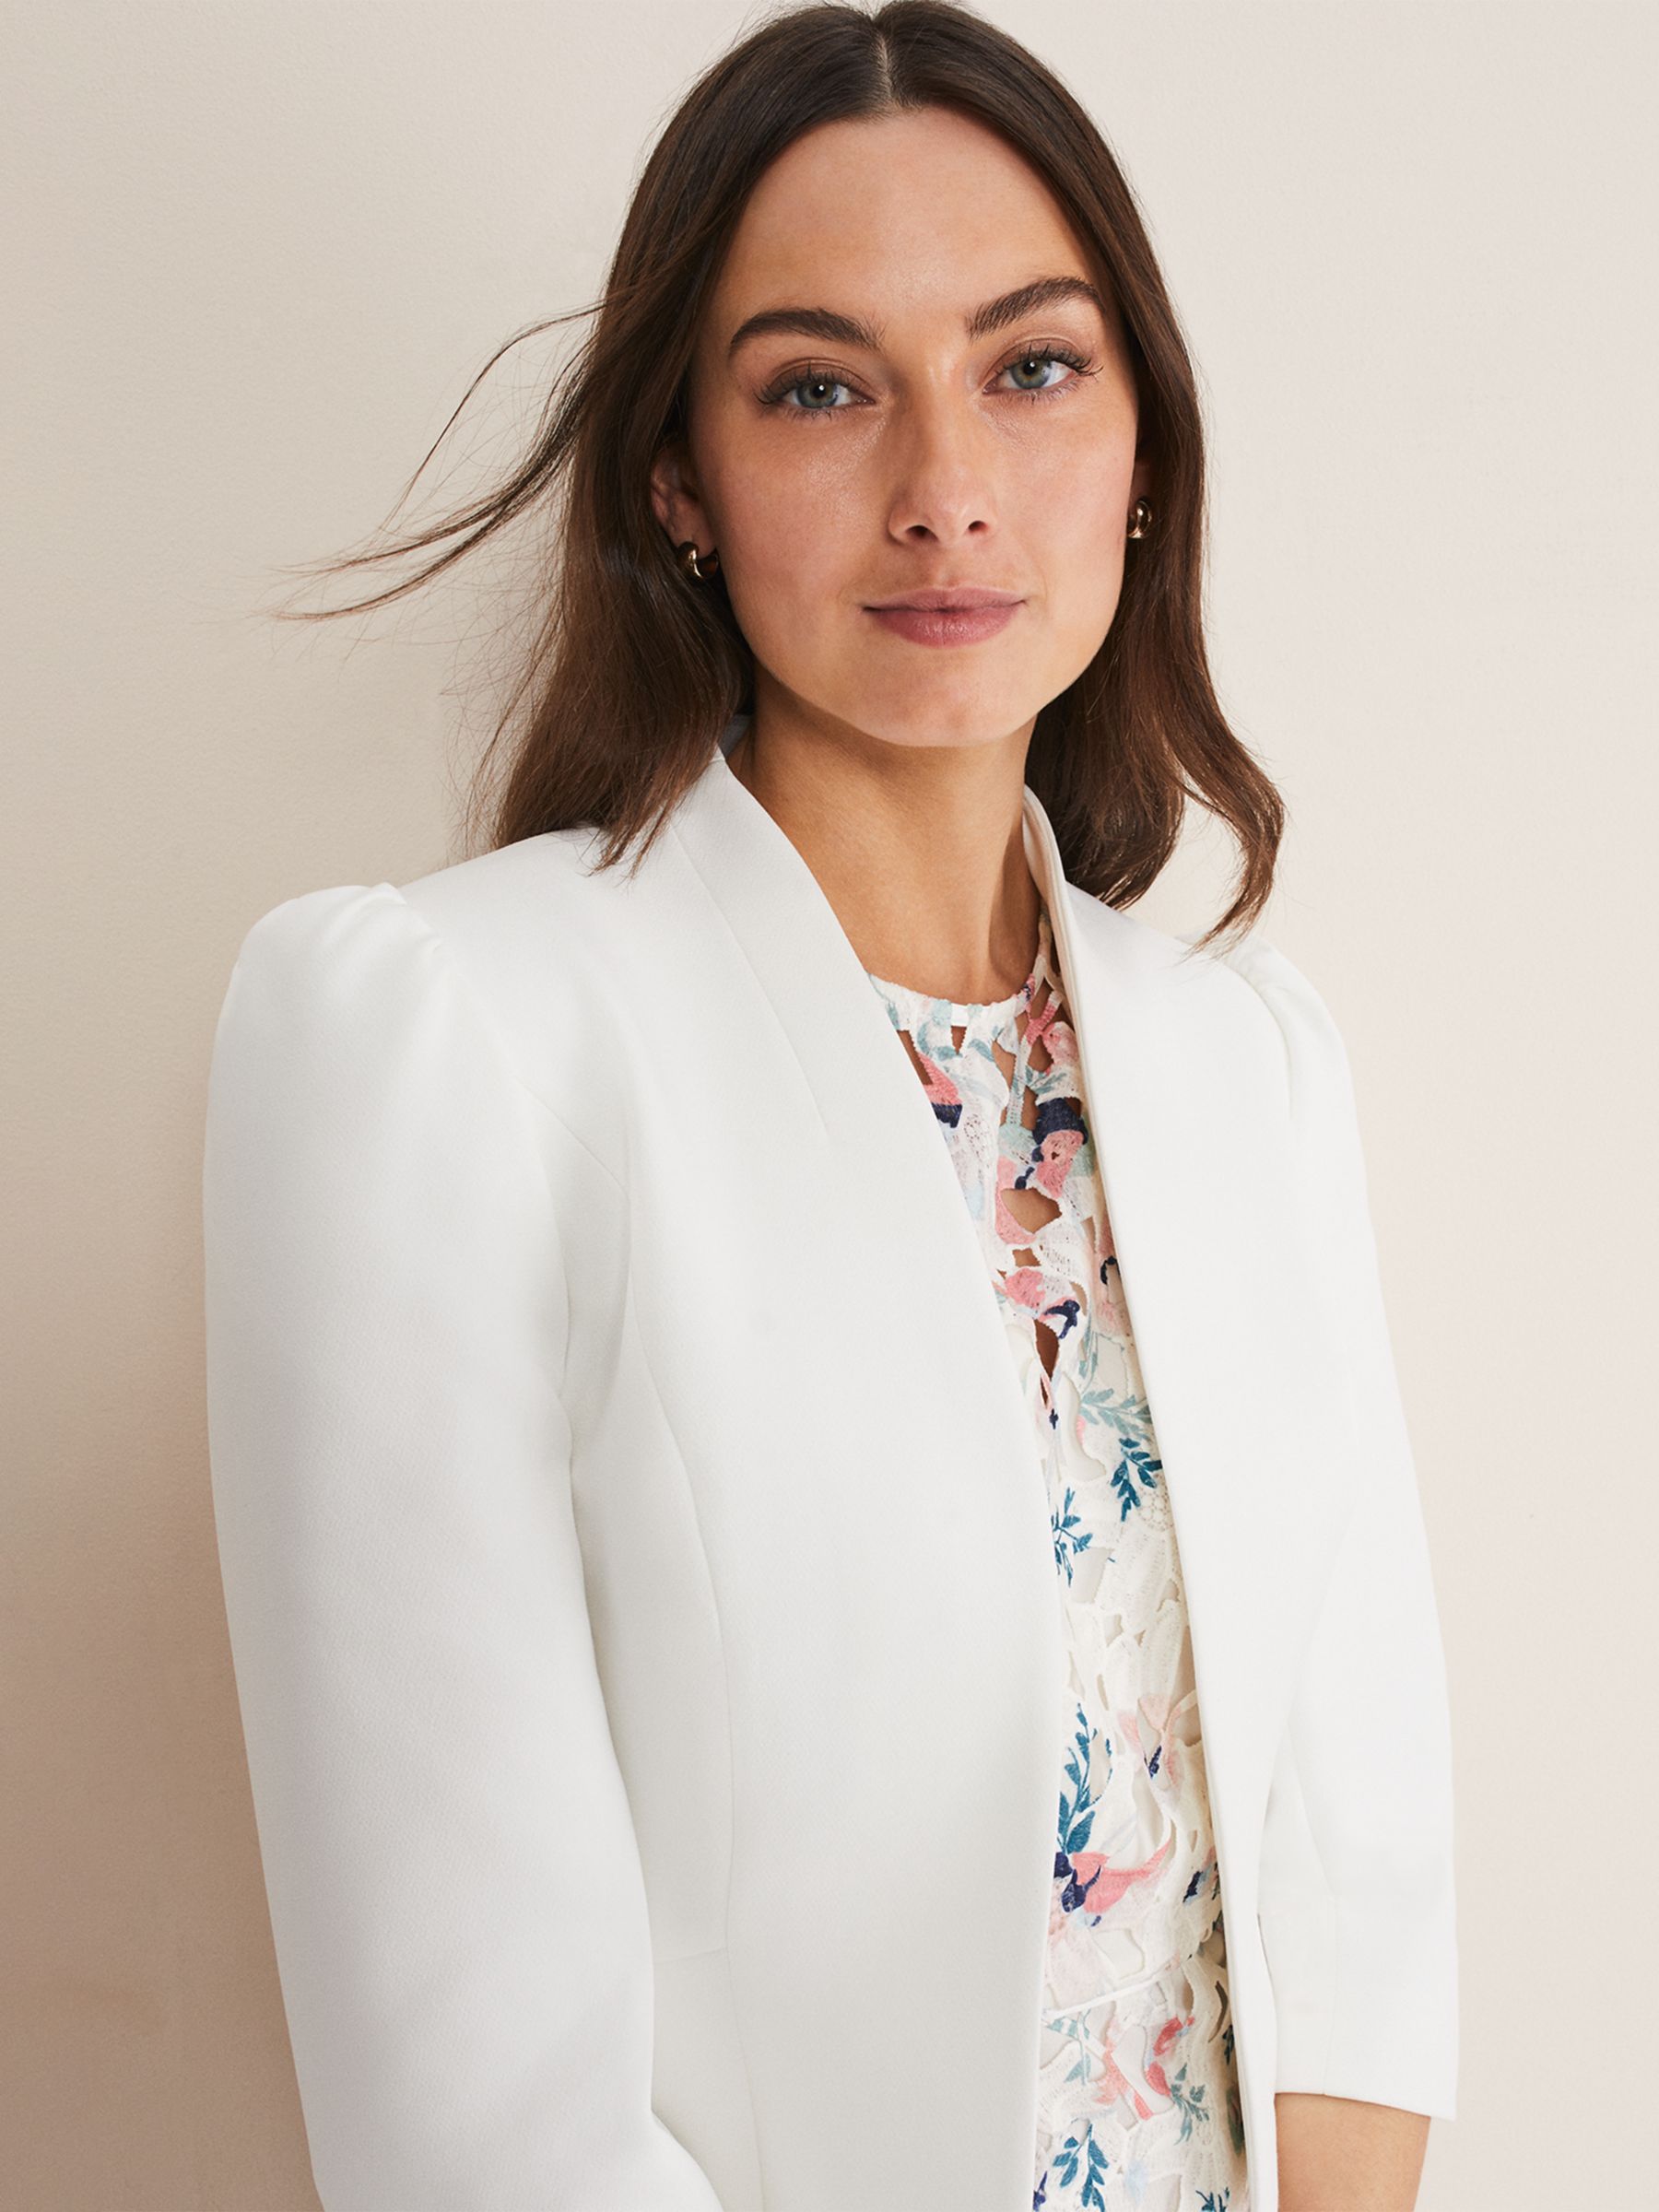 Buy Phase Eight Isabella Bow Detail Jacket Online at johnlewis.com